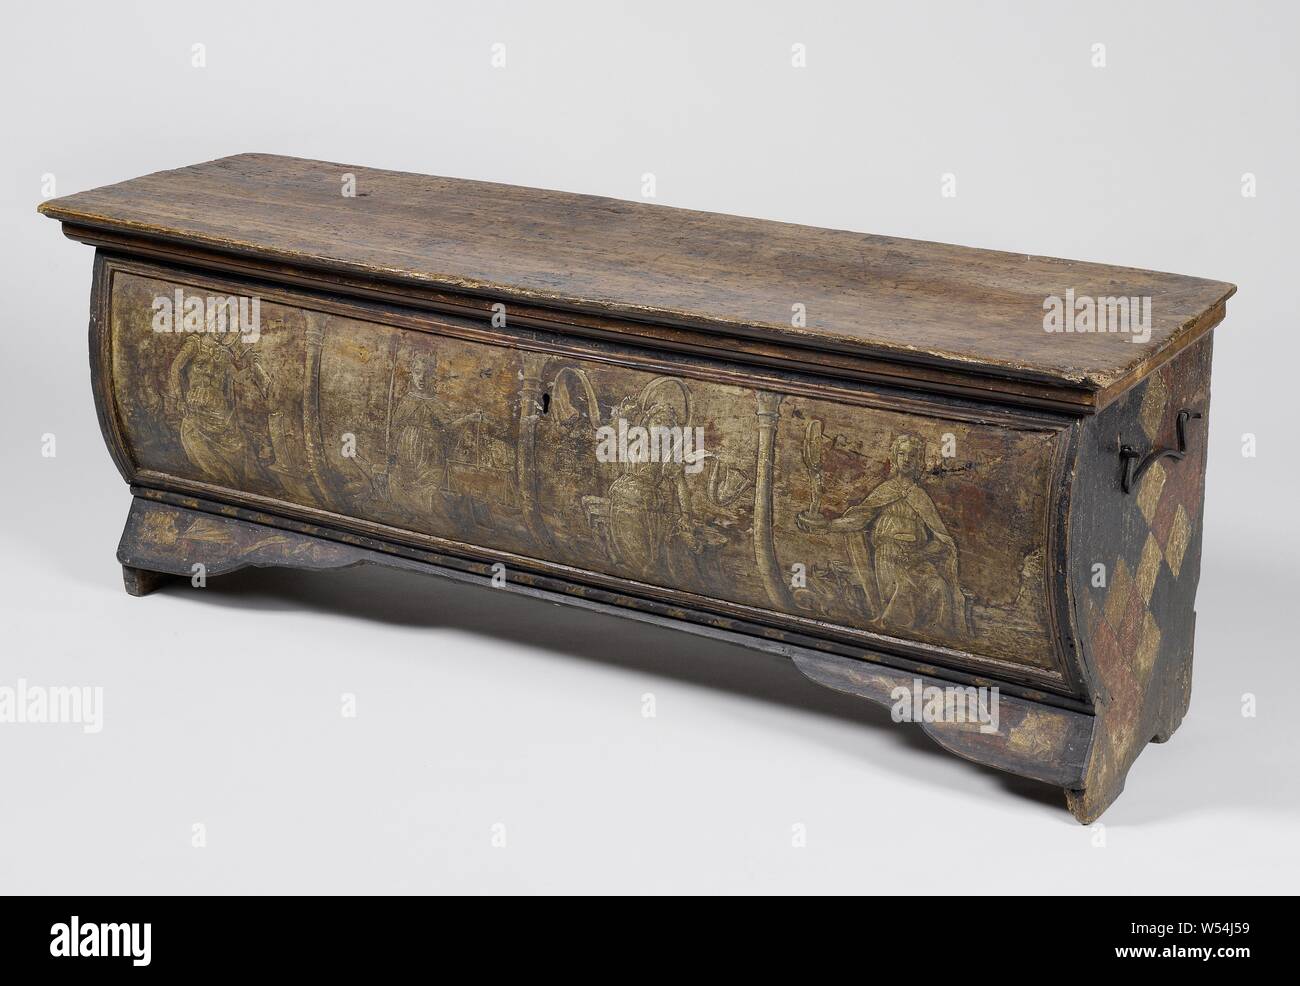 Coffin, painted with heraldic figures and with female figures sitting on the front between Corinthian columns: Fortitudo, Justitia, Temperantia and Prudentia, Coffin of painted poplar wood. The chest rests on the sides, which are painted with heraldic figures and carry iron handles. The front is semicircular and painted in grisaille with seated female figures separated by Corinthian columns, symbolizing Fortitudo, Temperantia and Prudentia from left to right. The threshold is angled, scalloped and painted on the corners in grisaille with two cobblestones blowing in sails, symbolizing Stock Photo